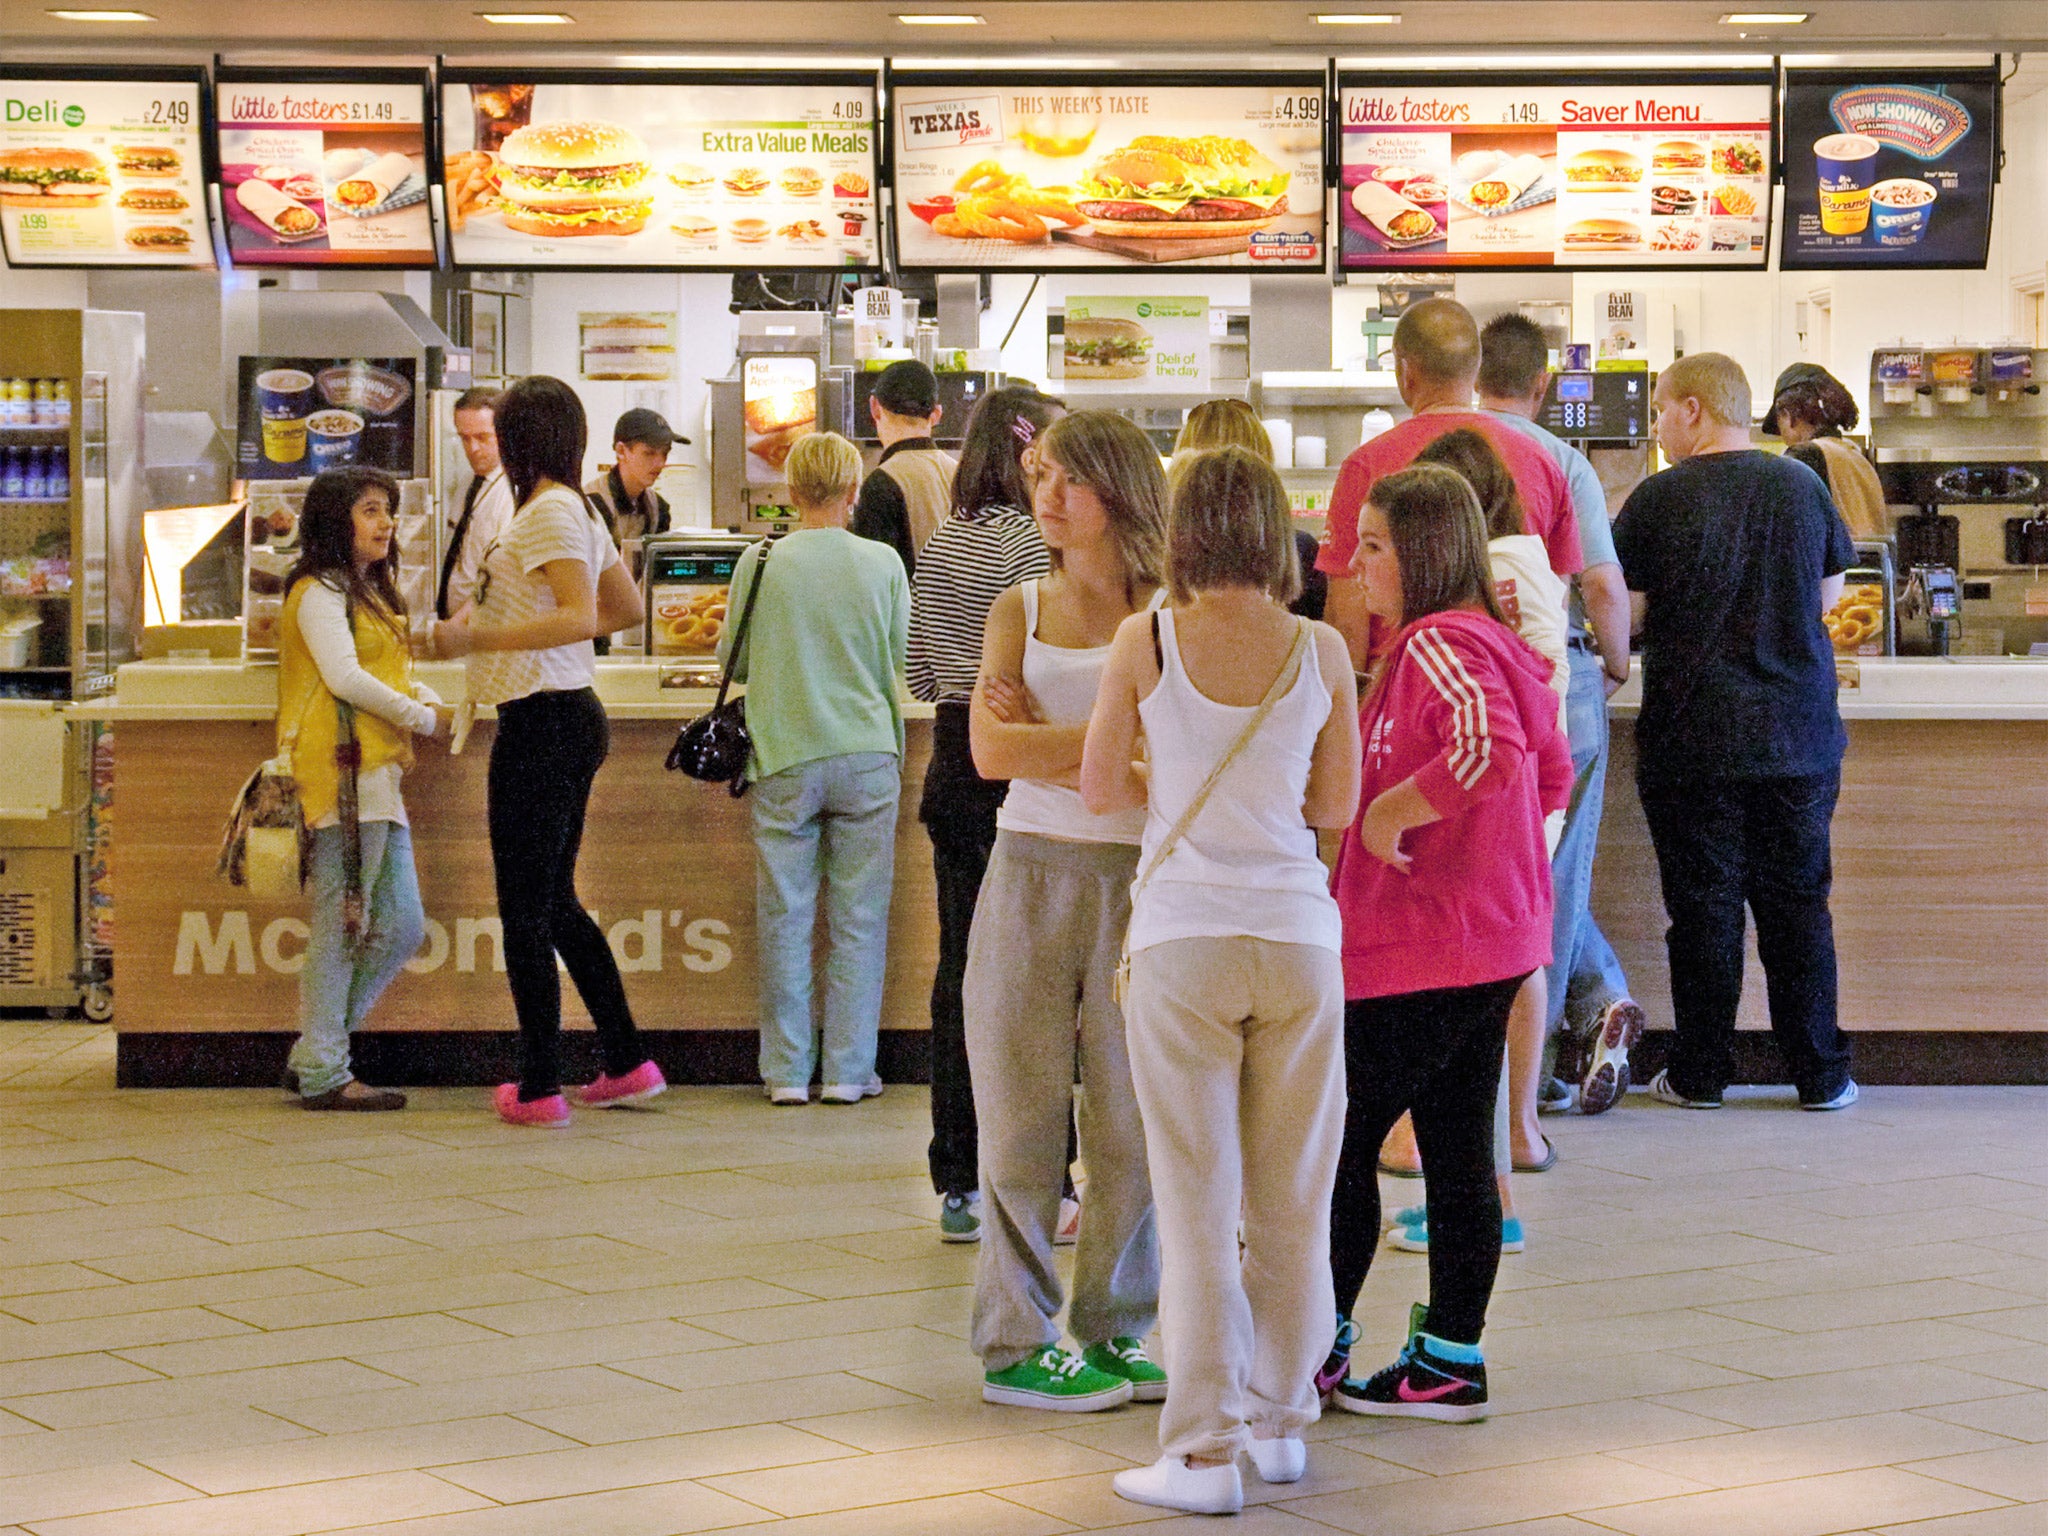 Experts hope the plan will encourage young people to eat more healthily